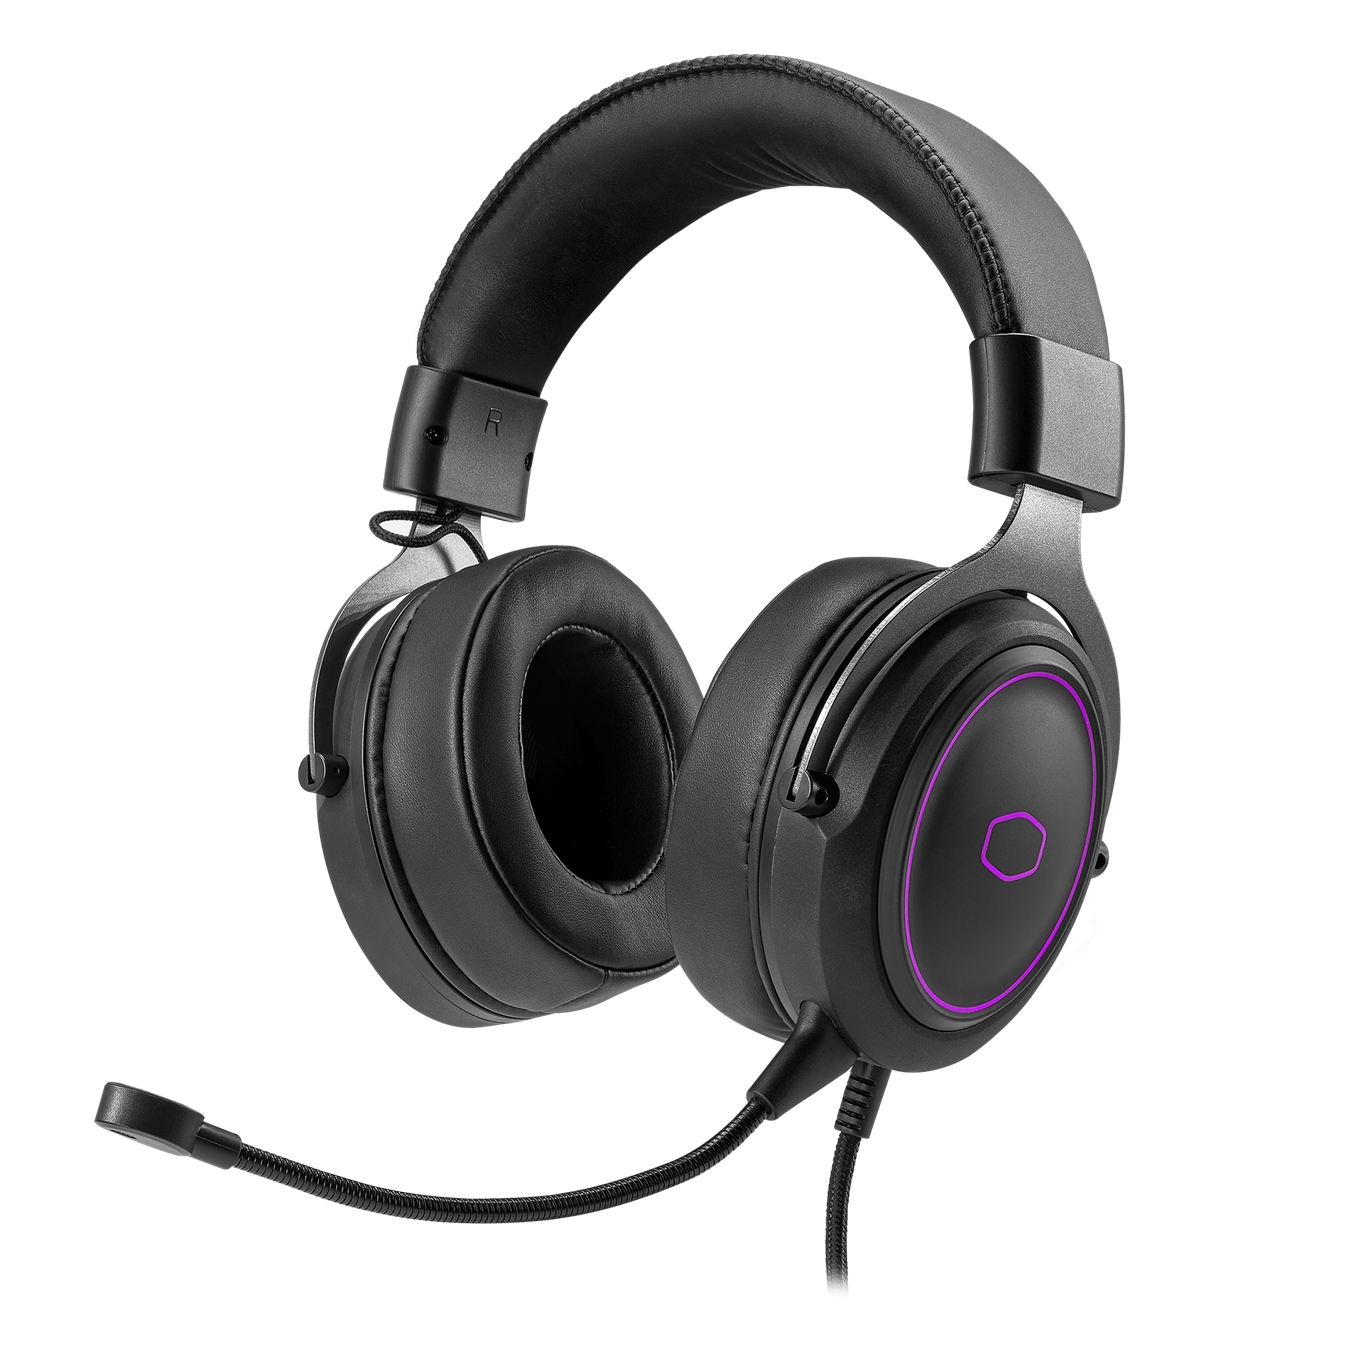 Virtual 7.1 Surround Sound - Custom tuned 50mm drivers deliver virtual 7.1 surround sound for a rich, detailed soundstage for gaming and entertainment